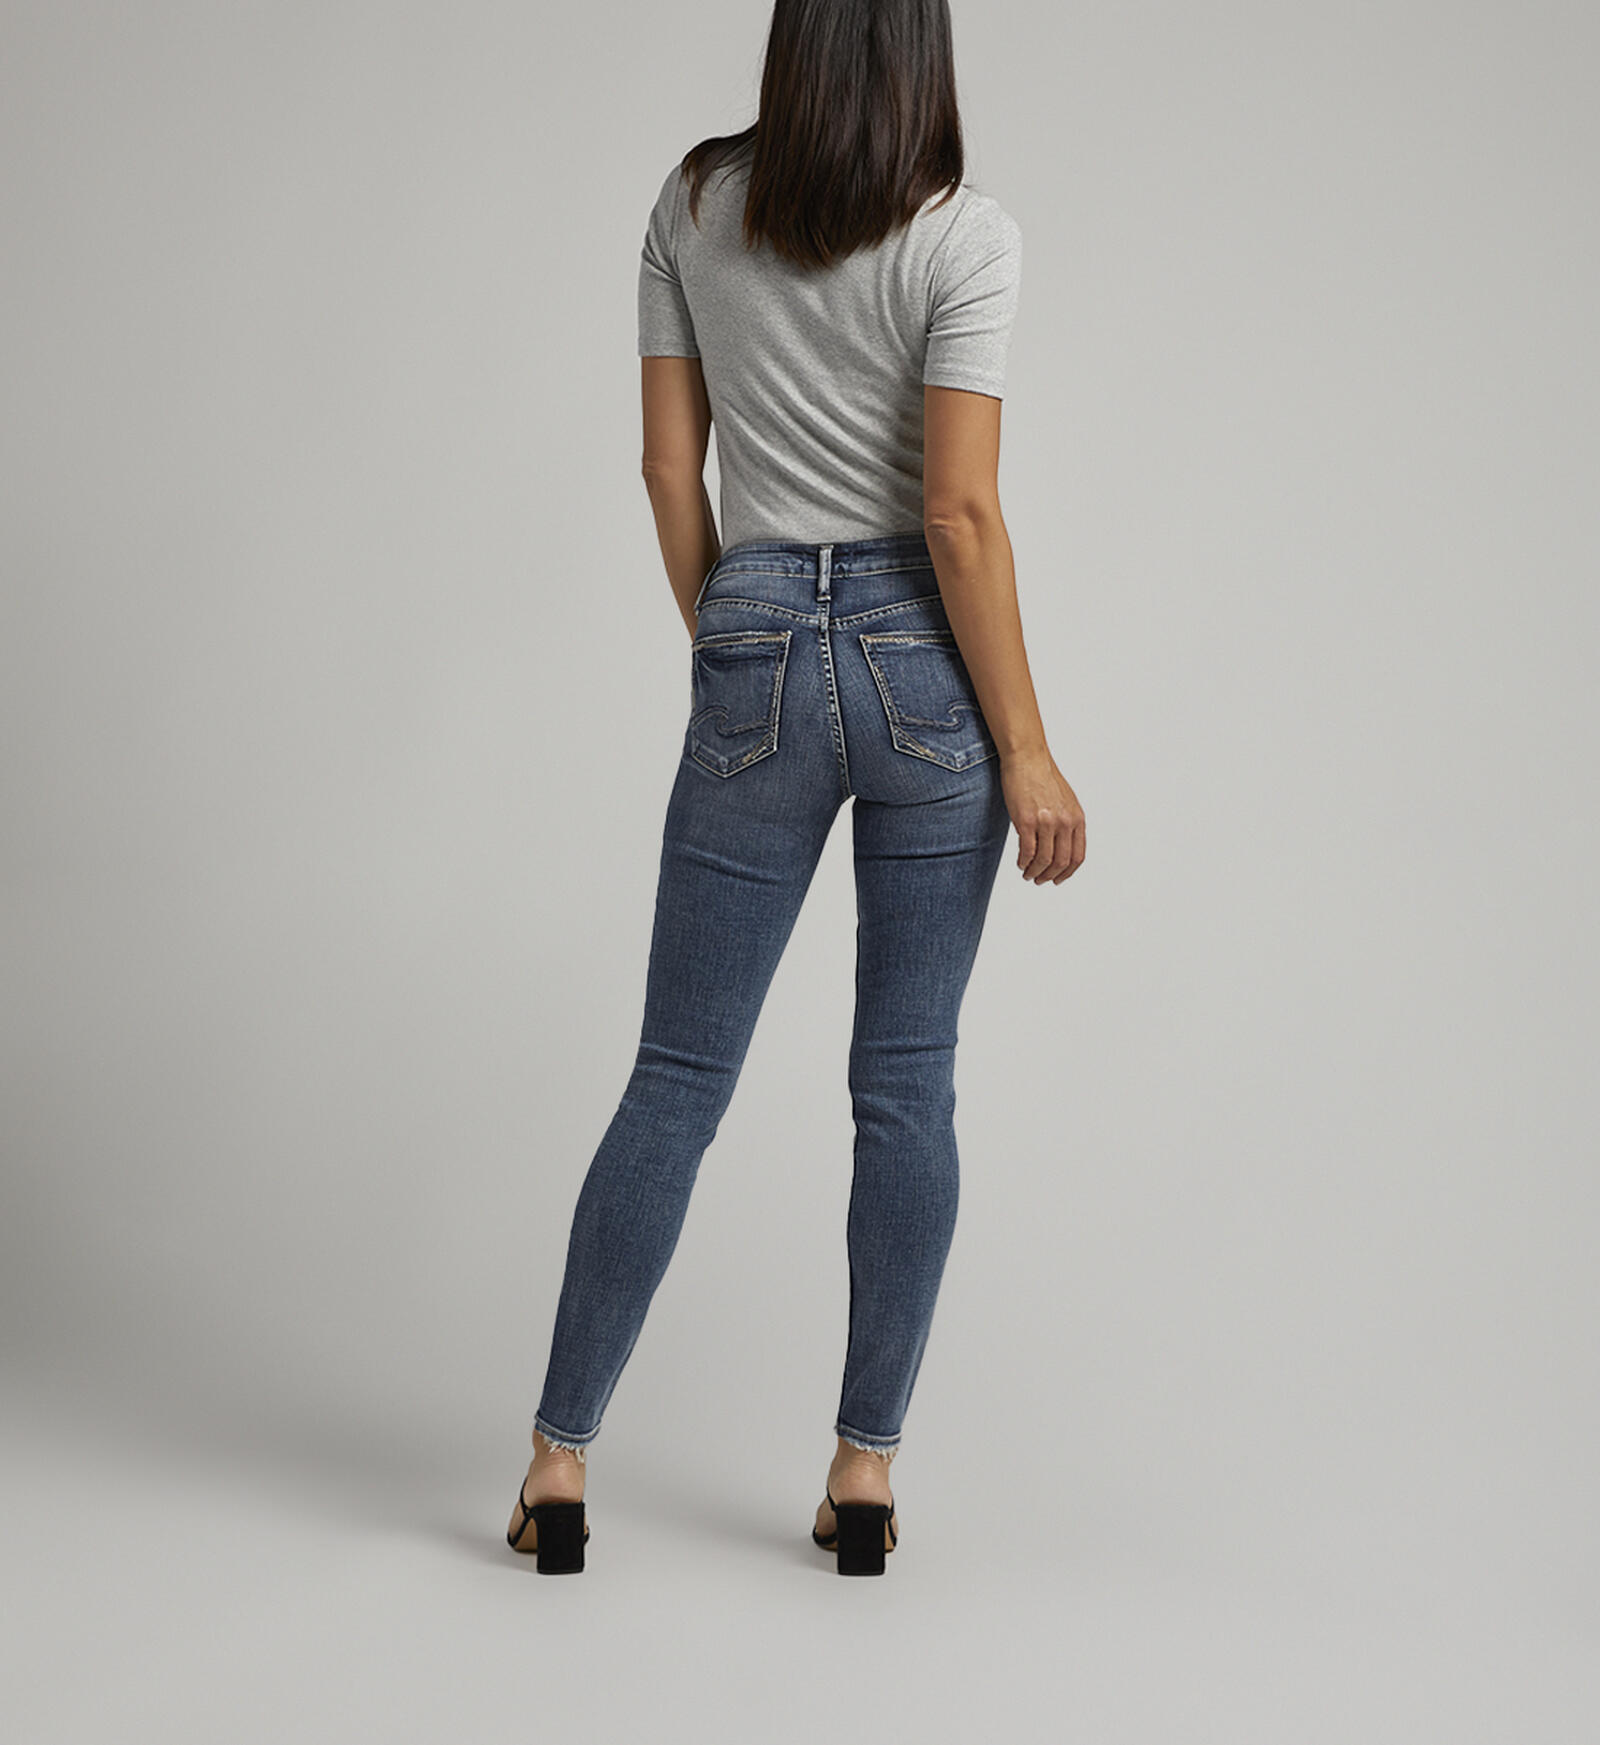 Buy Suki Mid Rise Skinny Jeans for USD 88.00